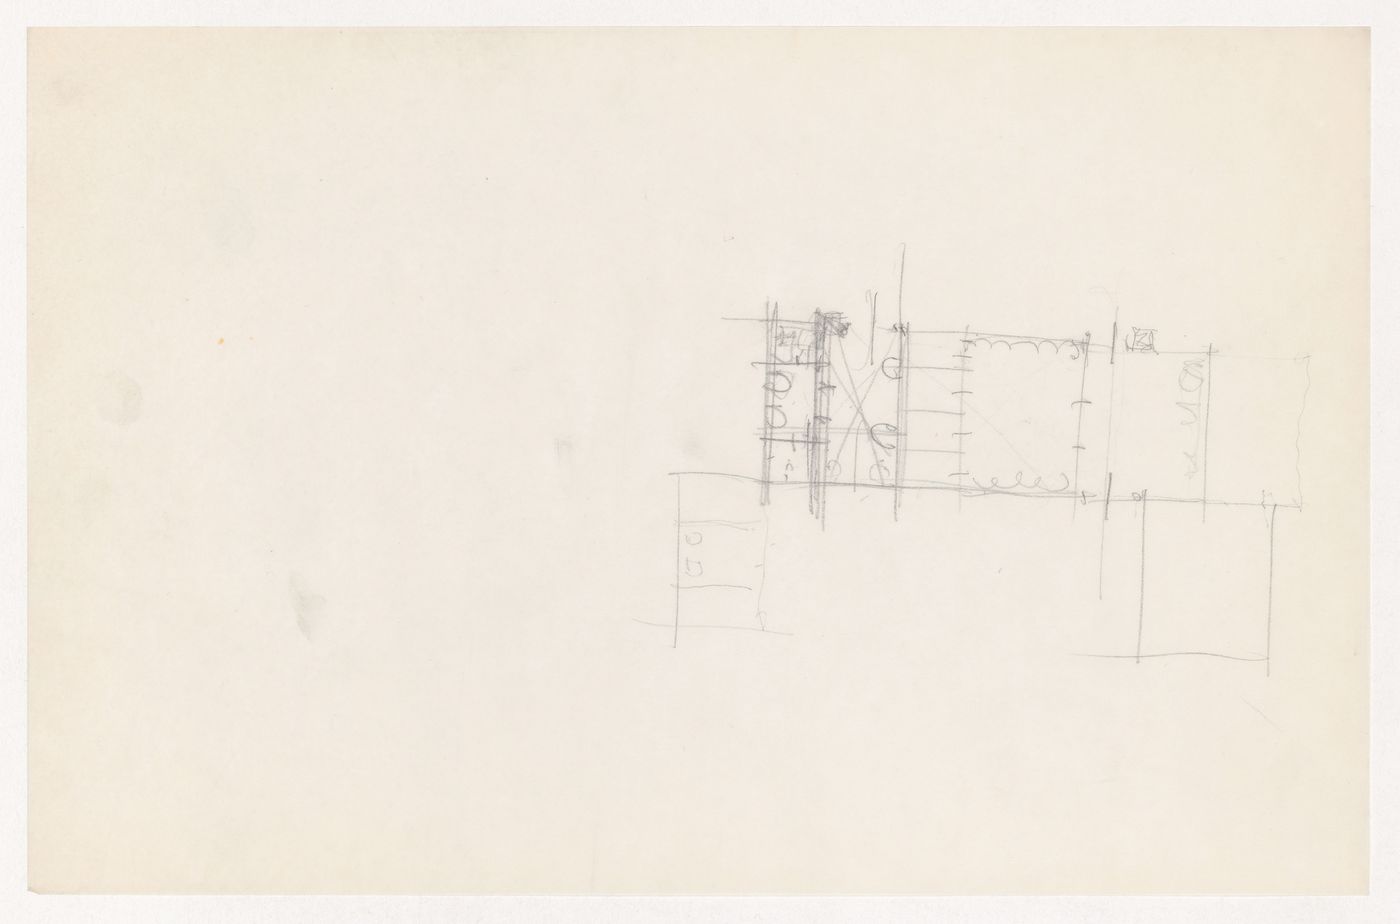 Partial sketch plan for the Metallurgy Building, Illinois Institute of Technology, Chicago